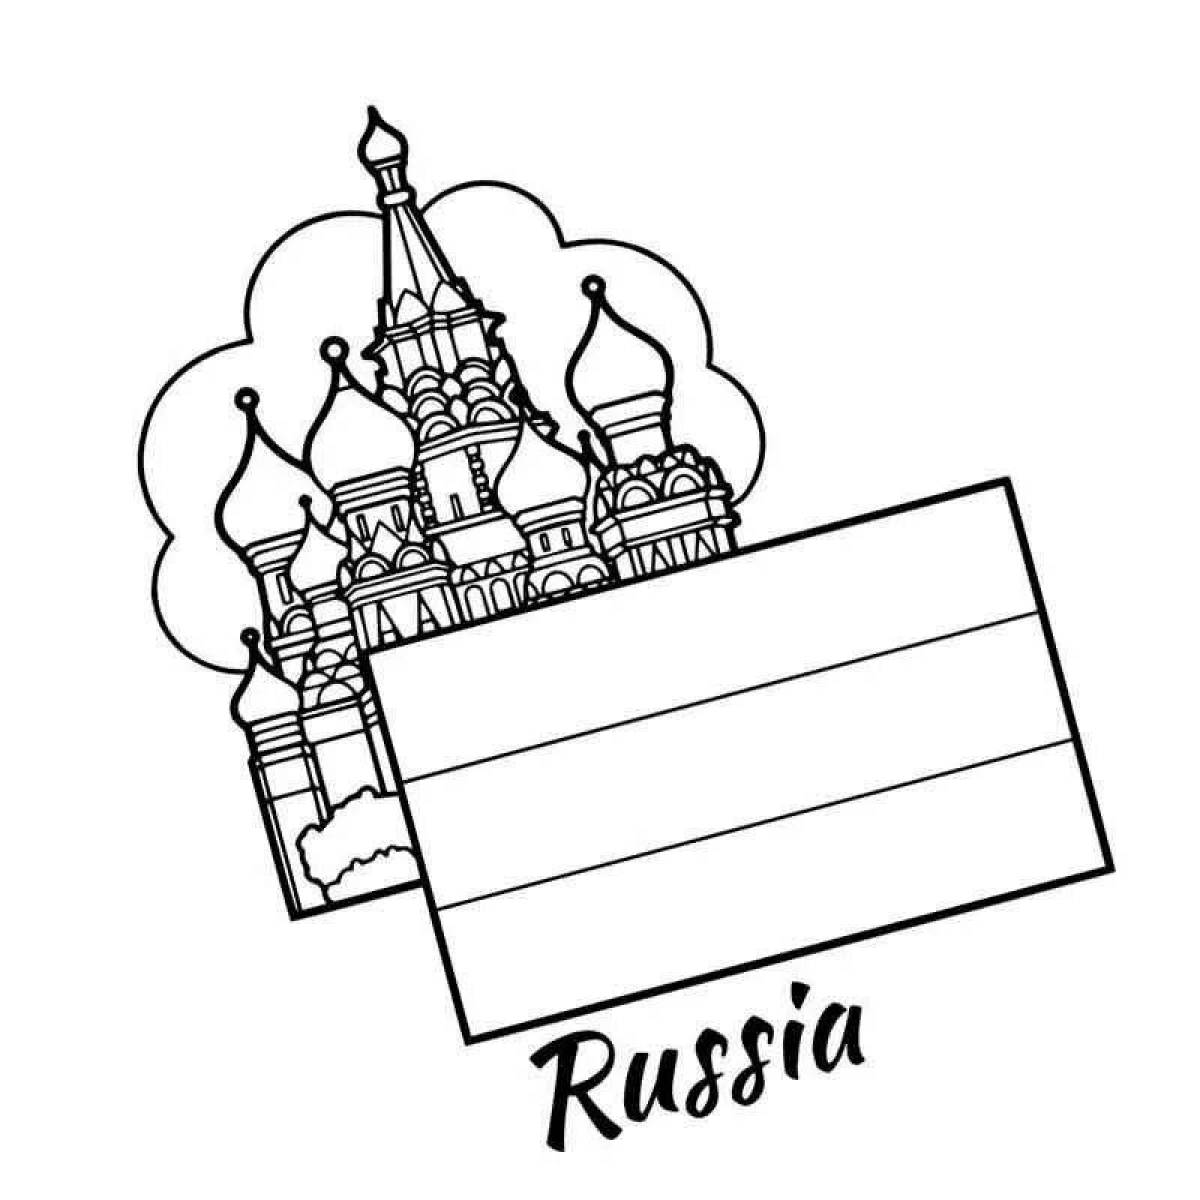 Funny Russian characters coloring book for kids